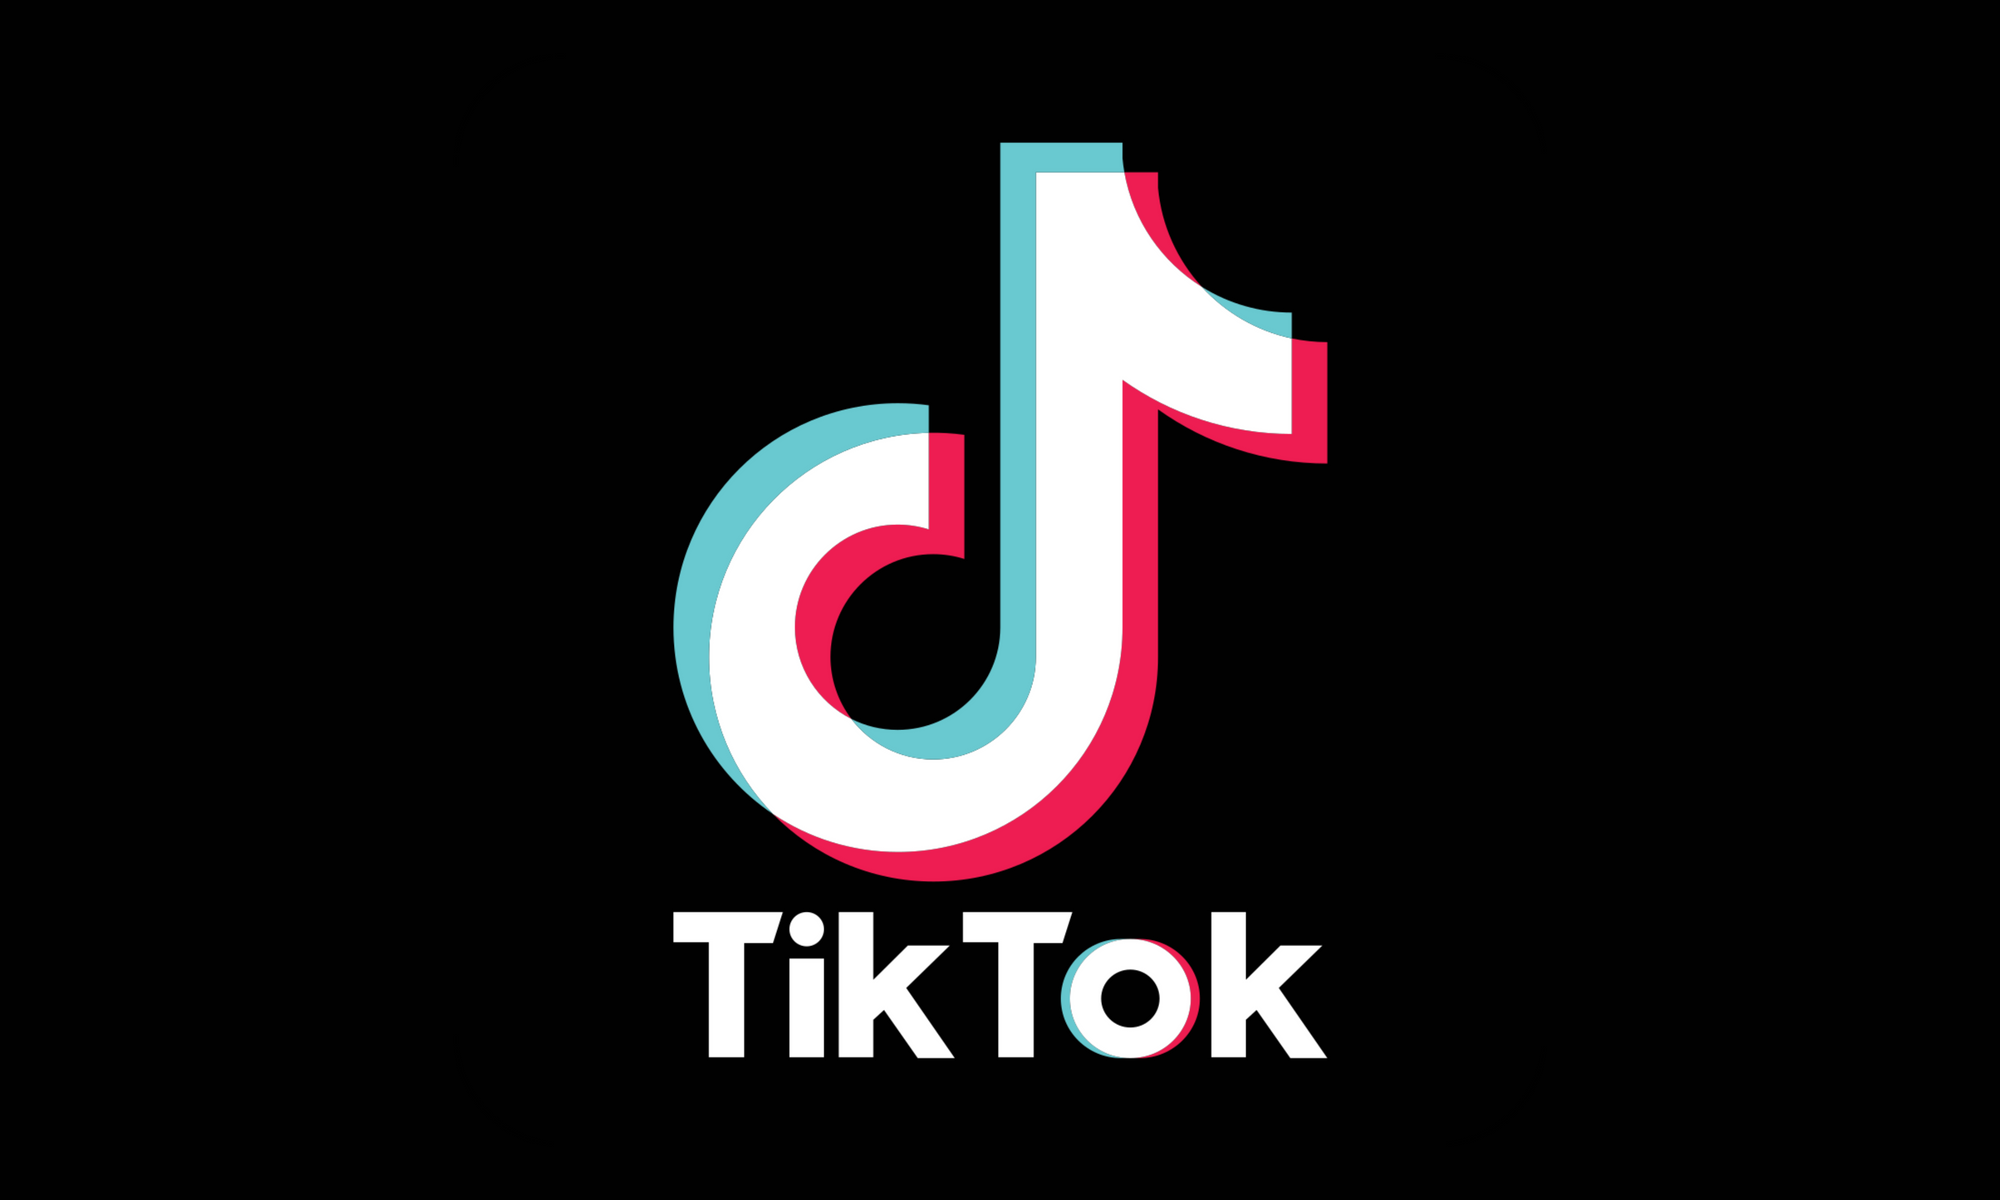 How to delete a TikTok account in 6 steps